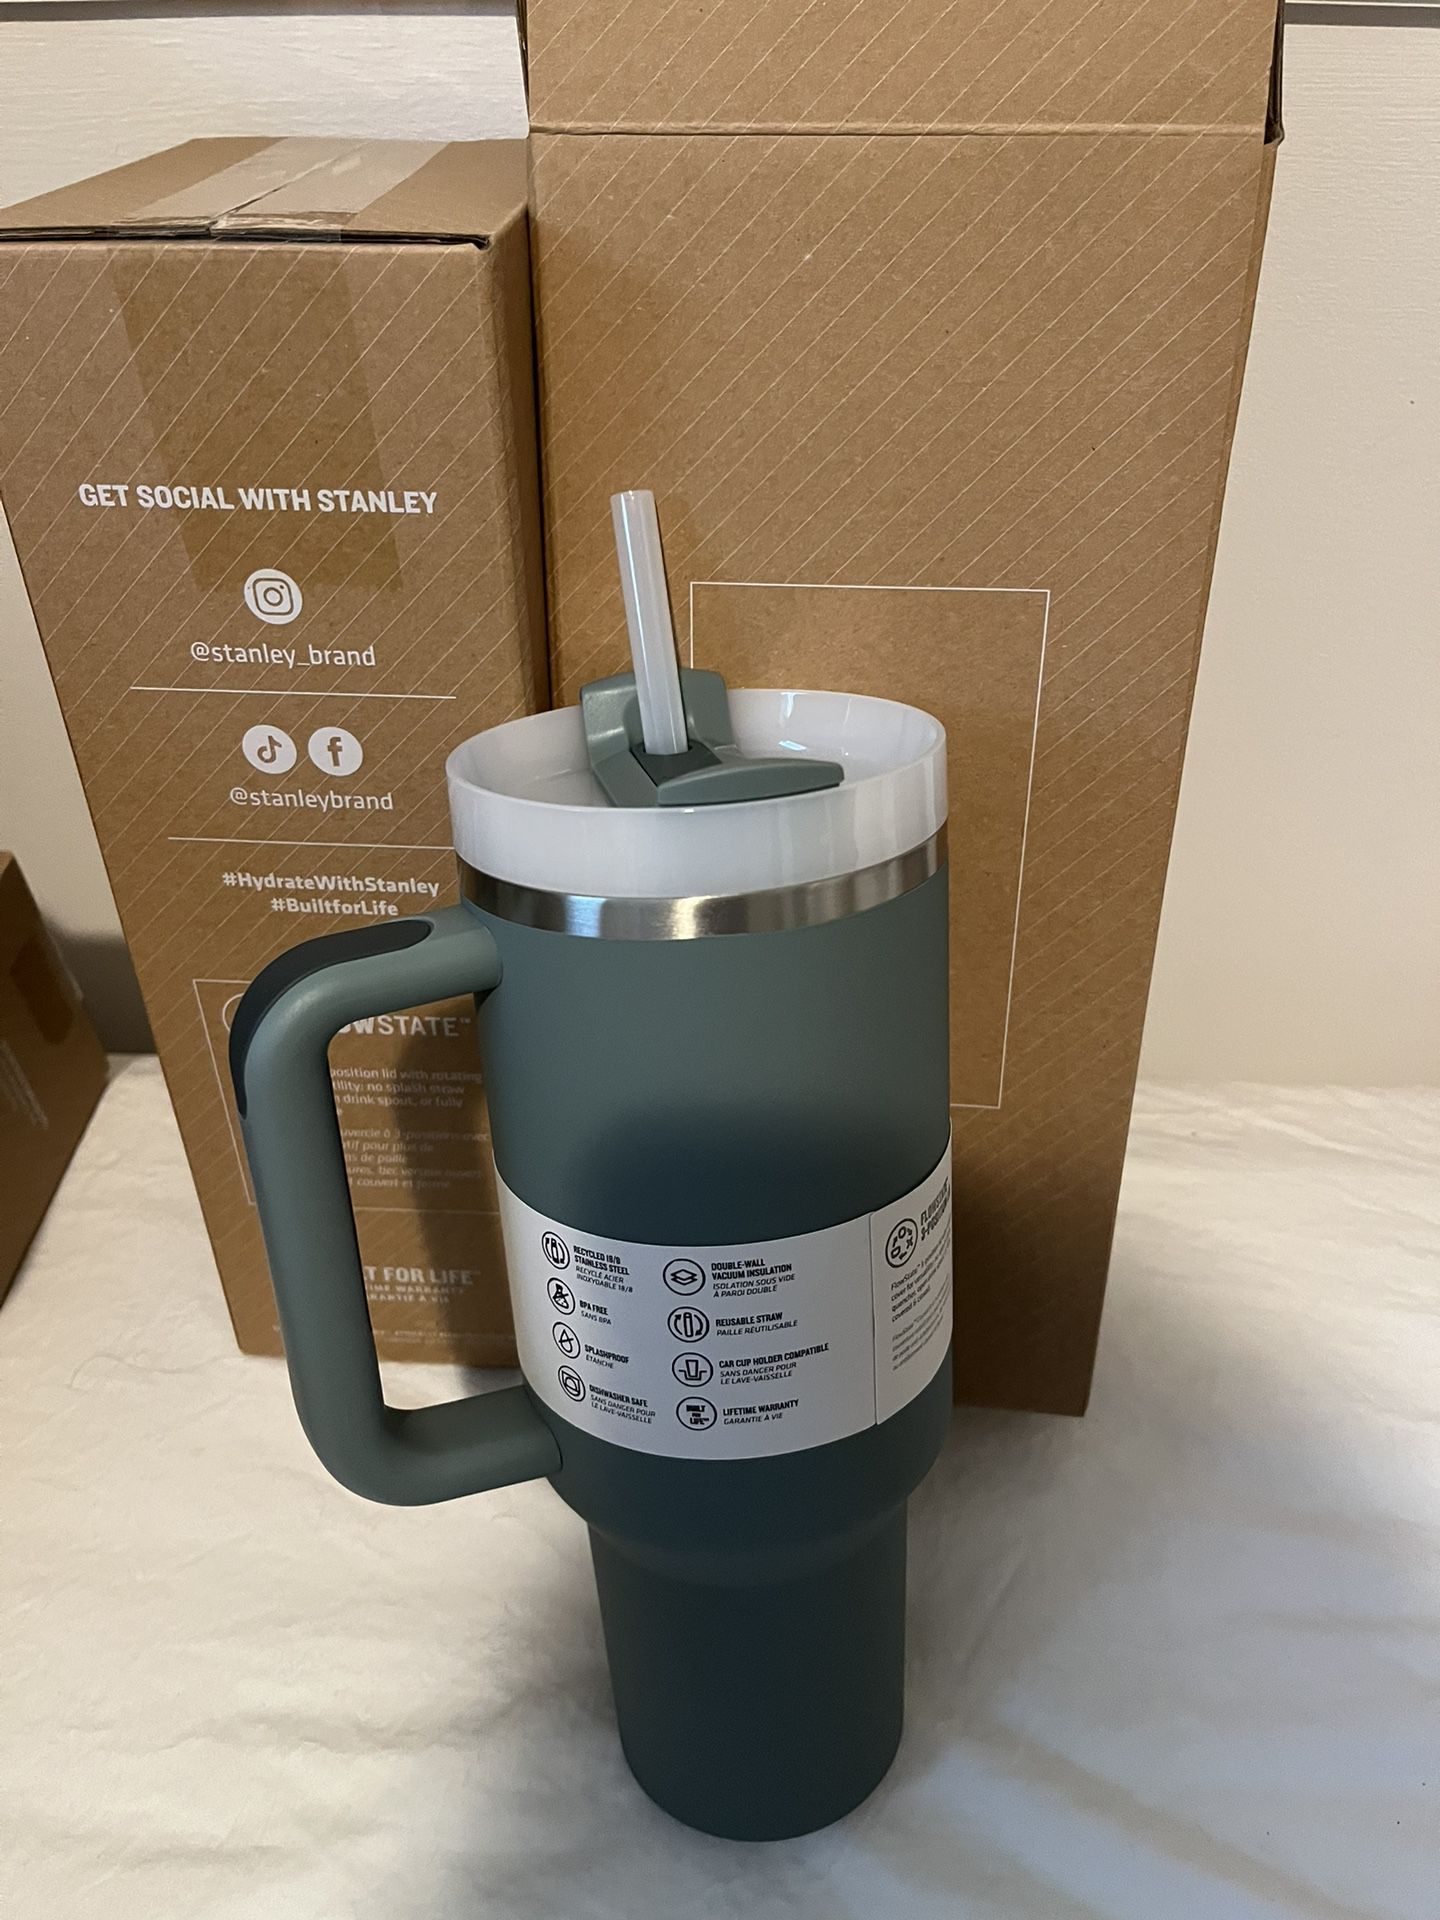 Stanley The Quencher H2.0 The Flowstate Tumbler 40 Oz-Tigerlily Orange for  Sale in Charlotte, NC - OfferUp